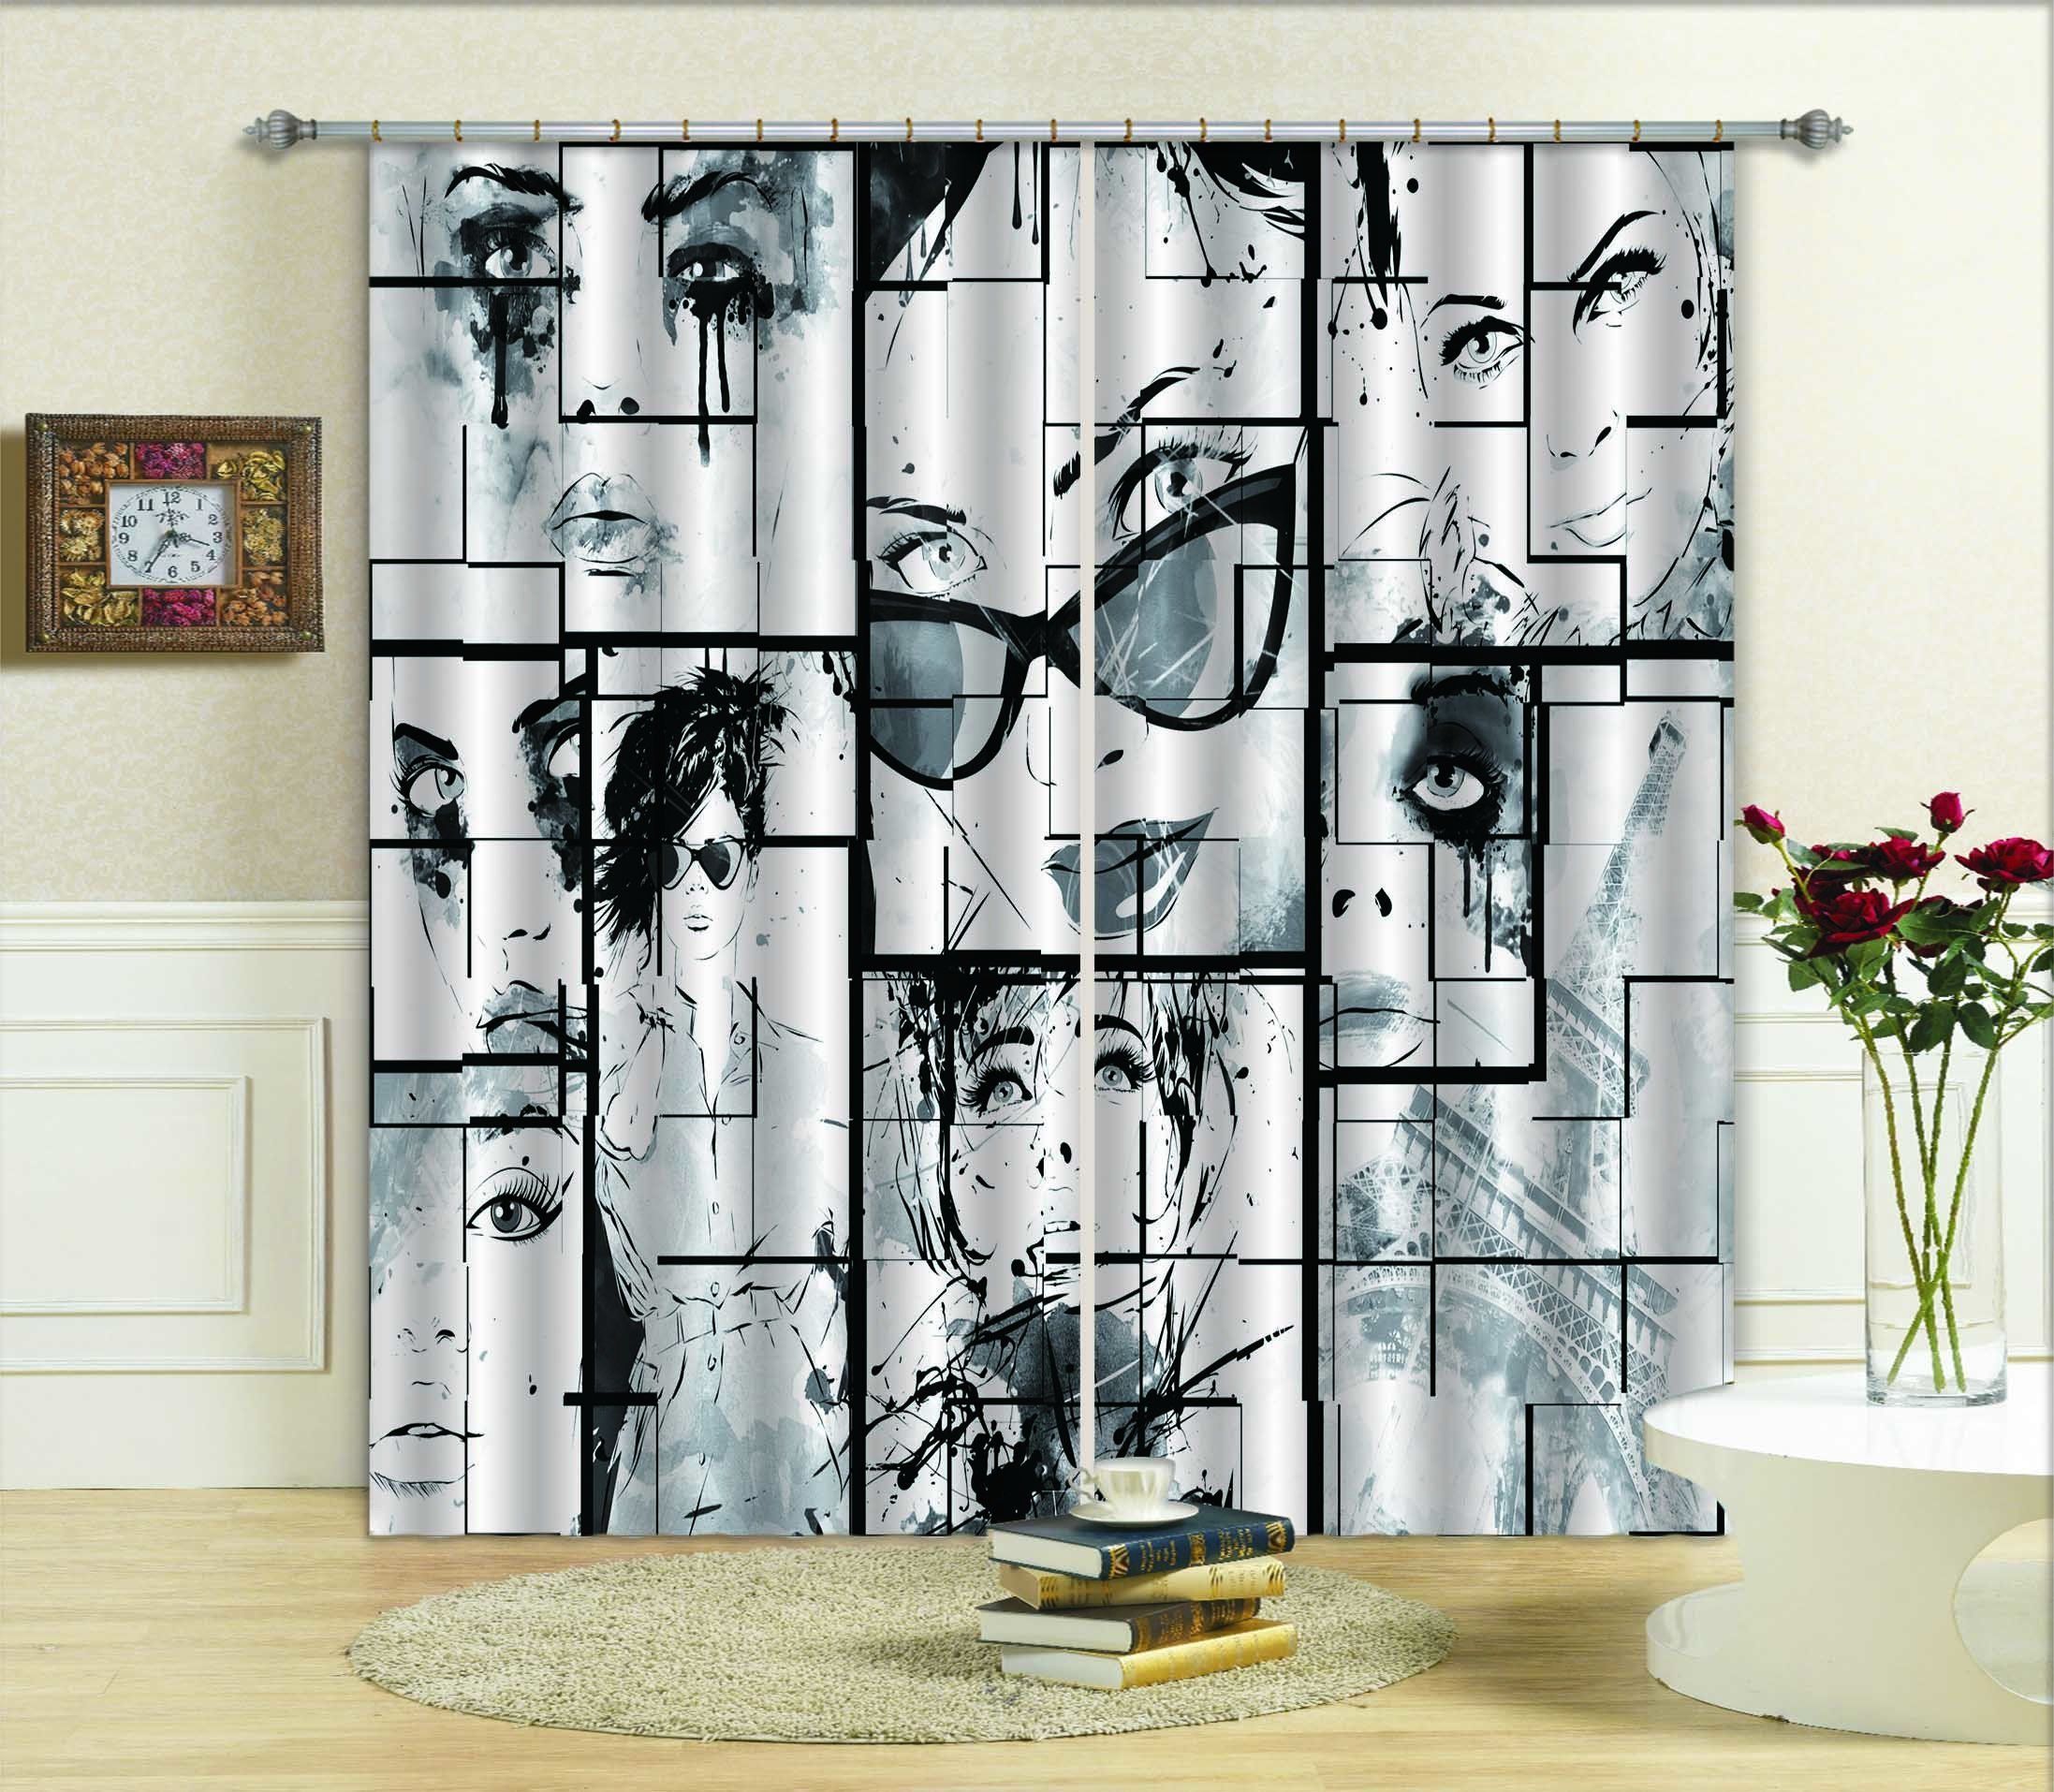 Attractive Lady With Glasses Printed Window Curtain